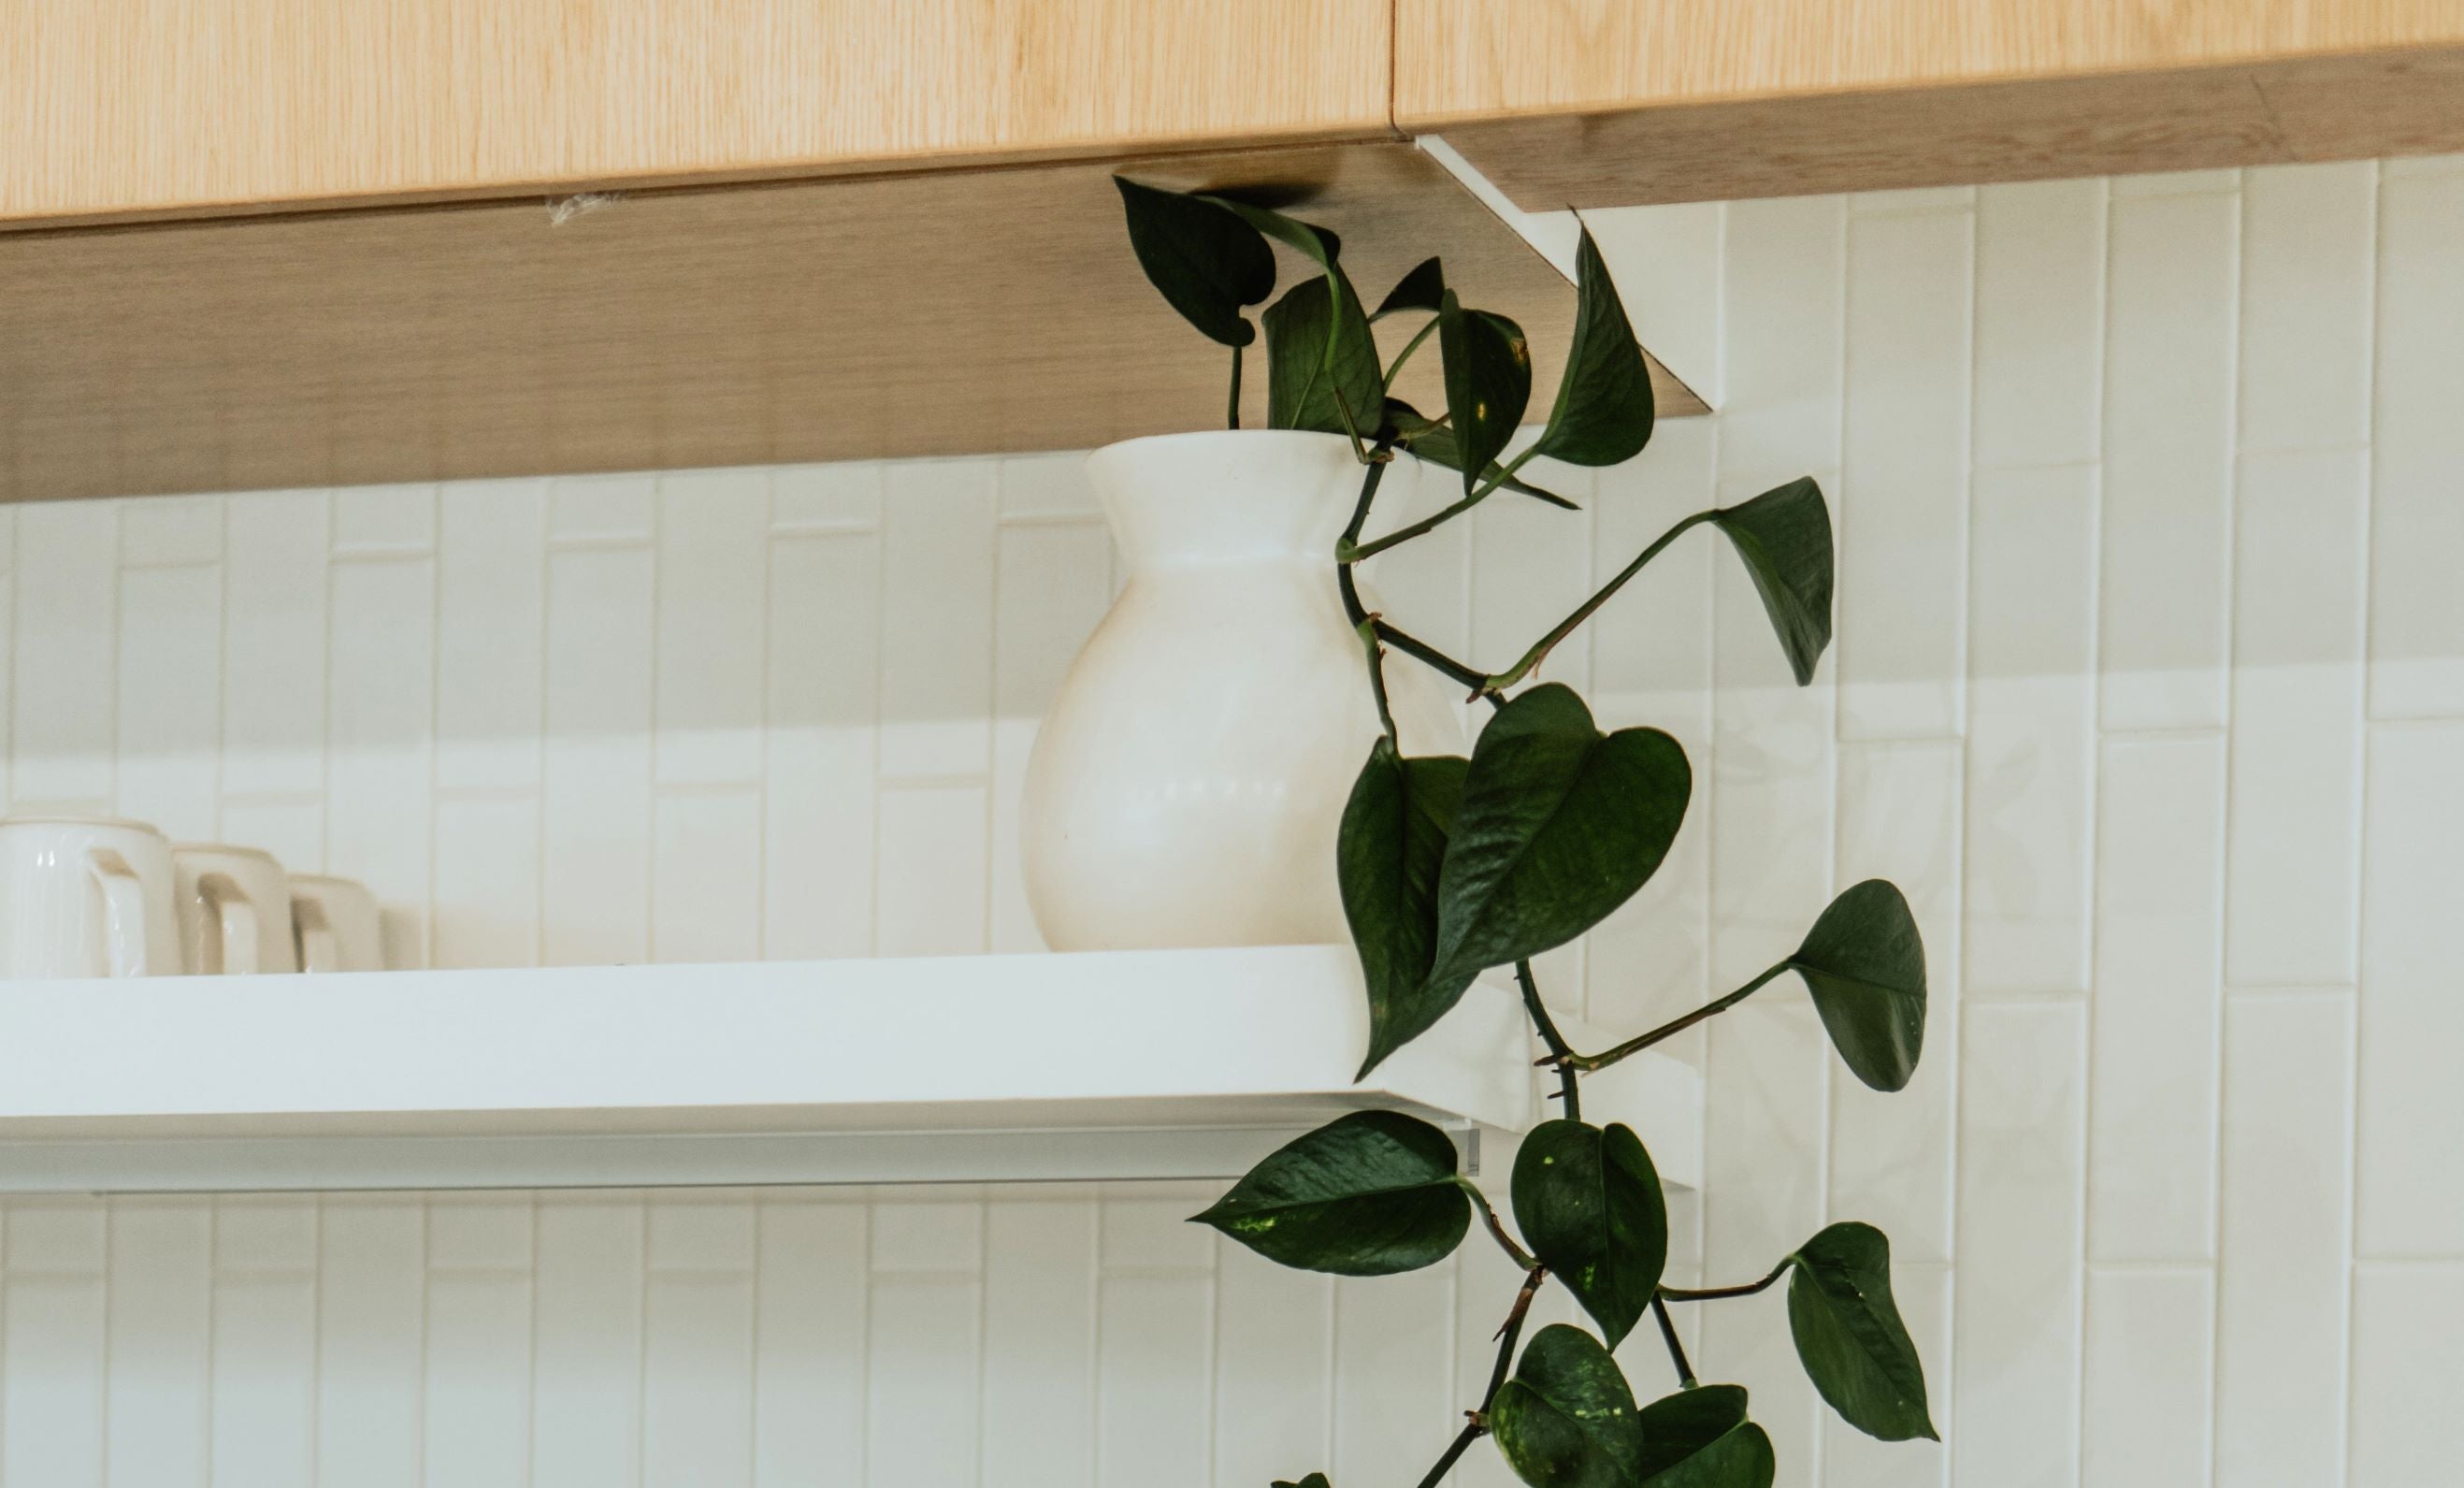 Potted Hanging Plants Near White Wall